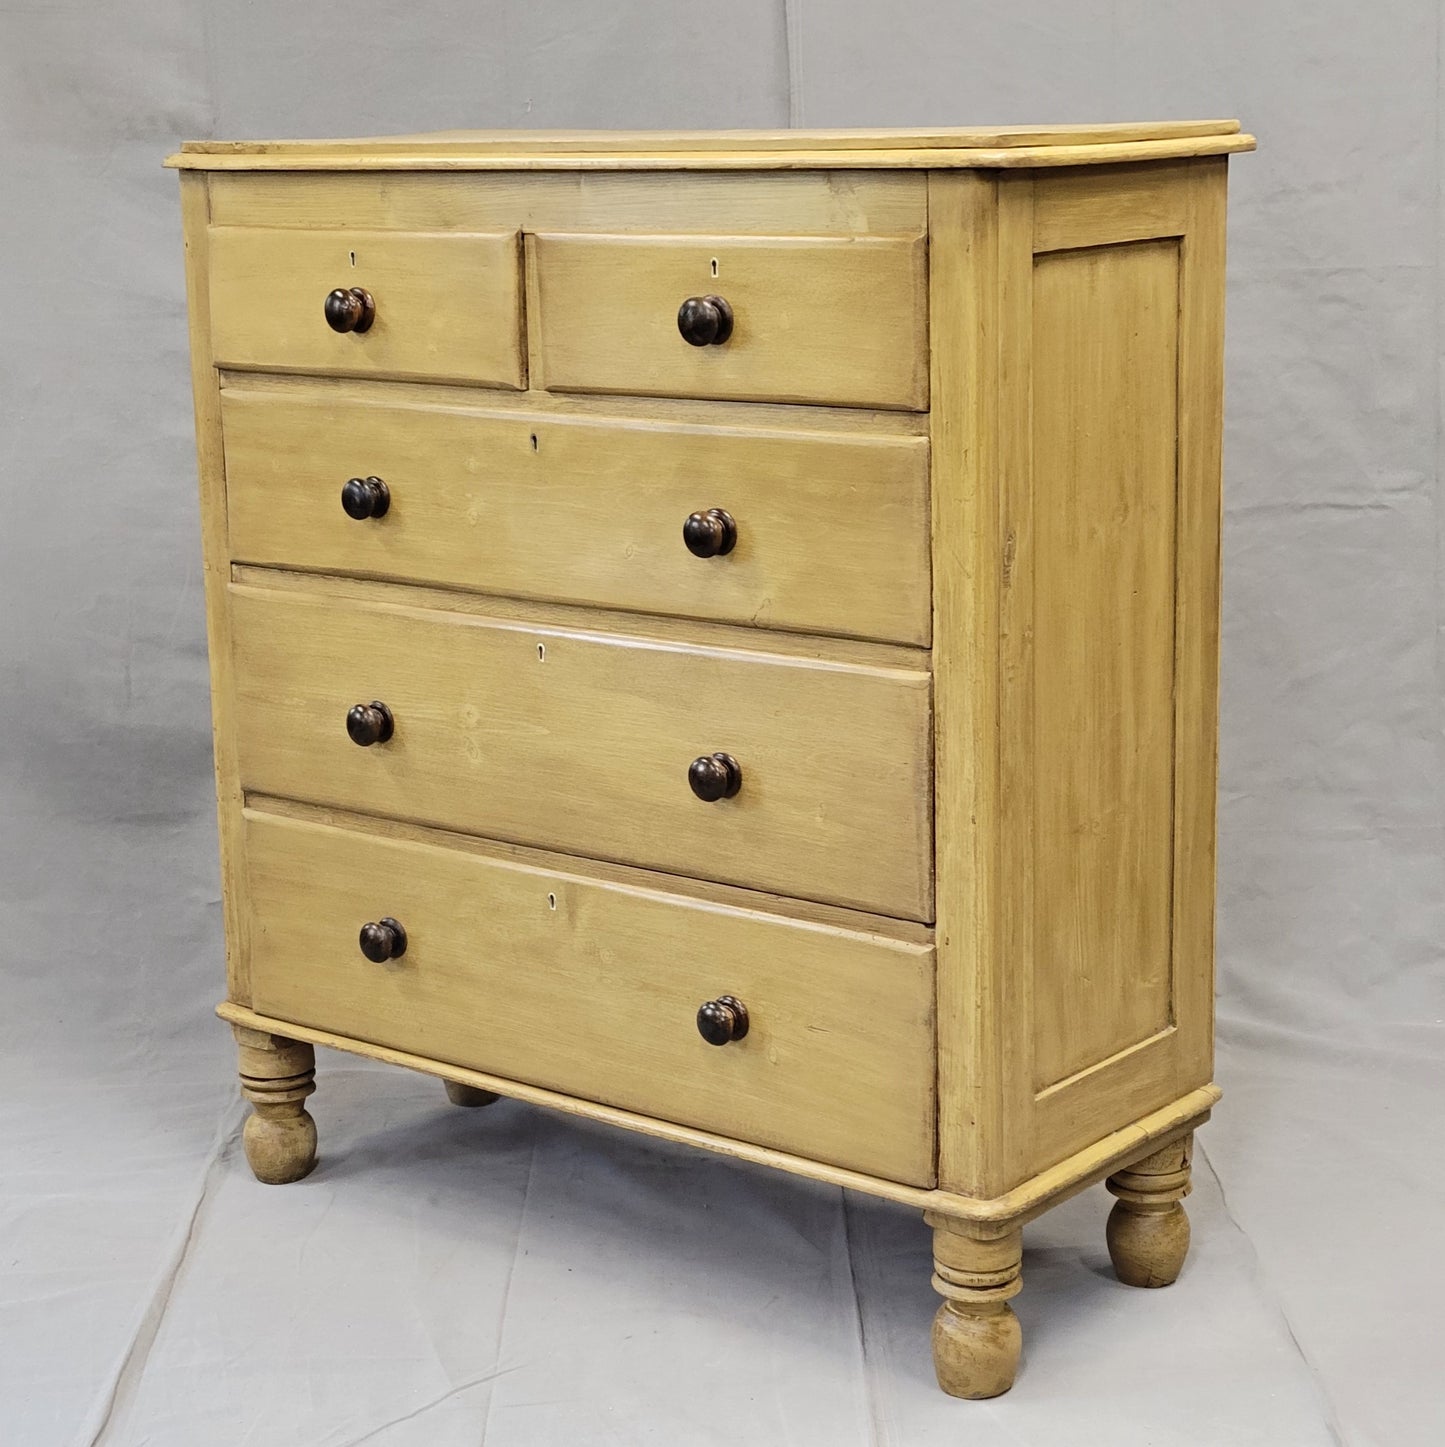 Antique English Edwardian Circa 1900 Painted Pine Dresser Chest of Drawers With Turned Feet